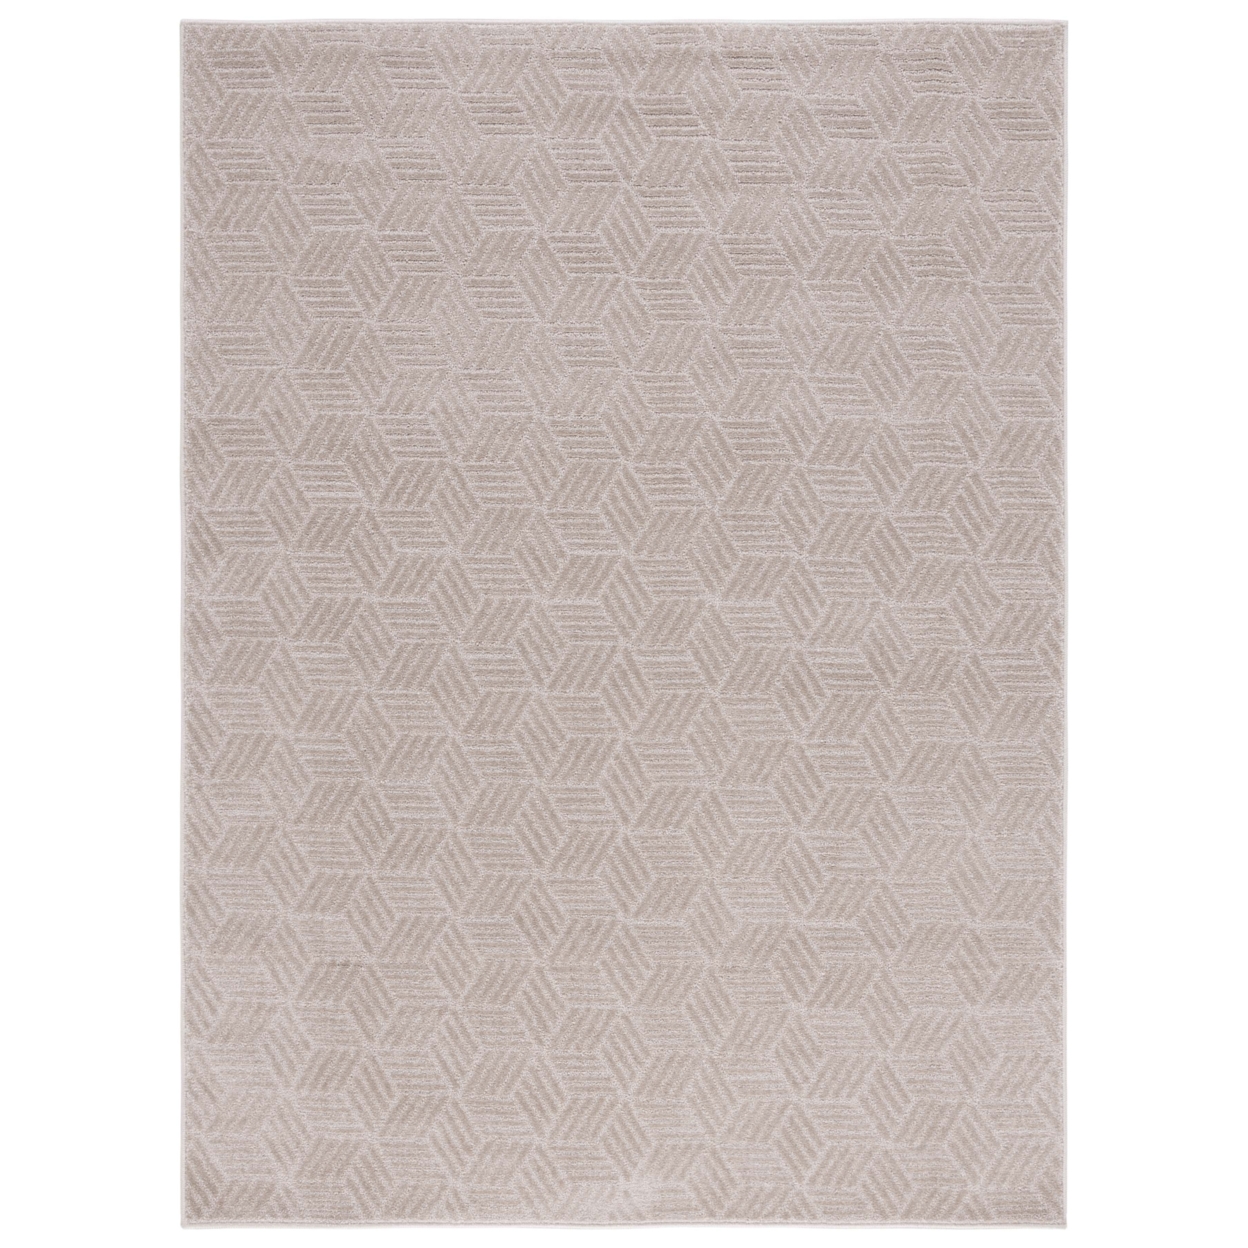 Safavieh PNS410B Pattern And Solid Beige - Pink / Ivory, 5'-3 X 7'-6 Rectangle